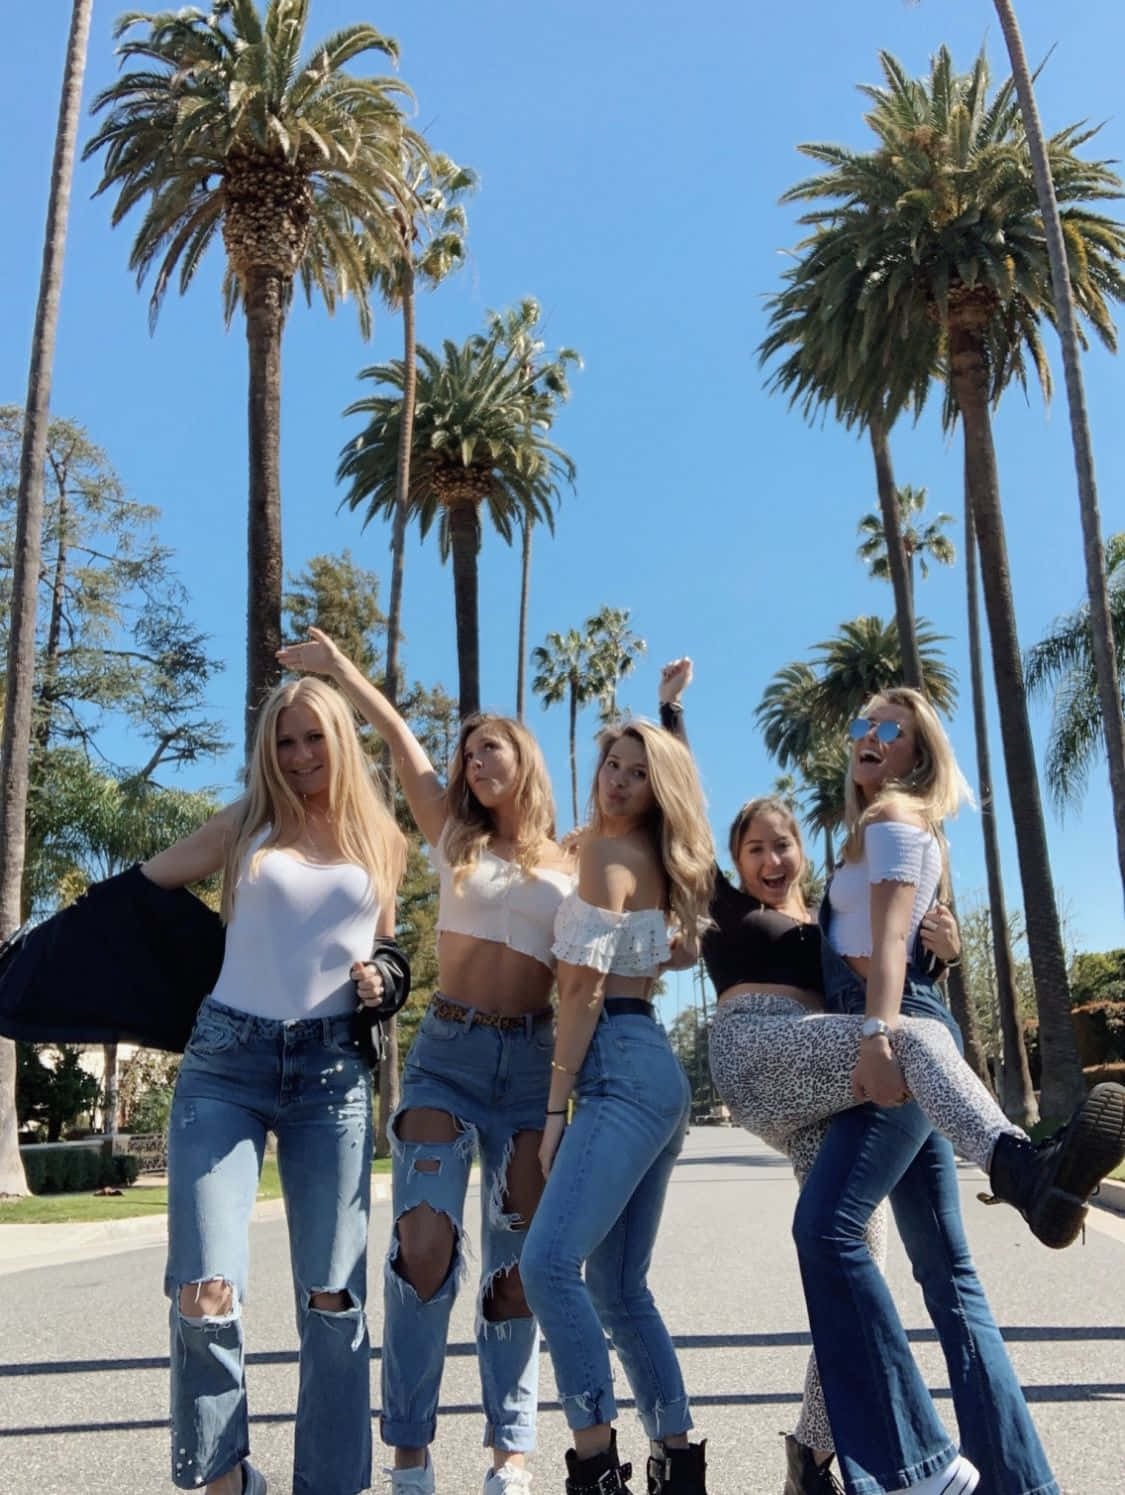 A Group Of Girls In Jeans And T-shirts Posing For A Photo